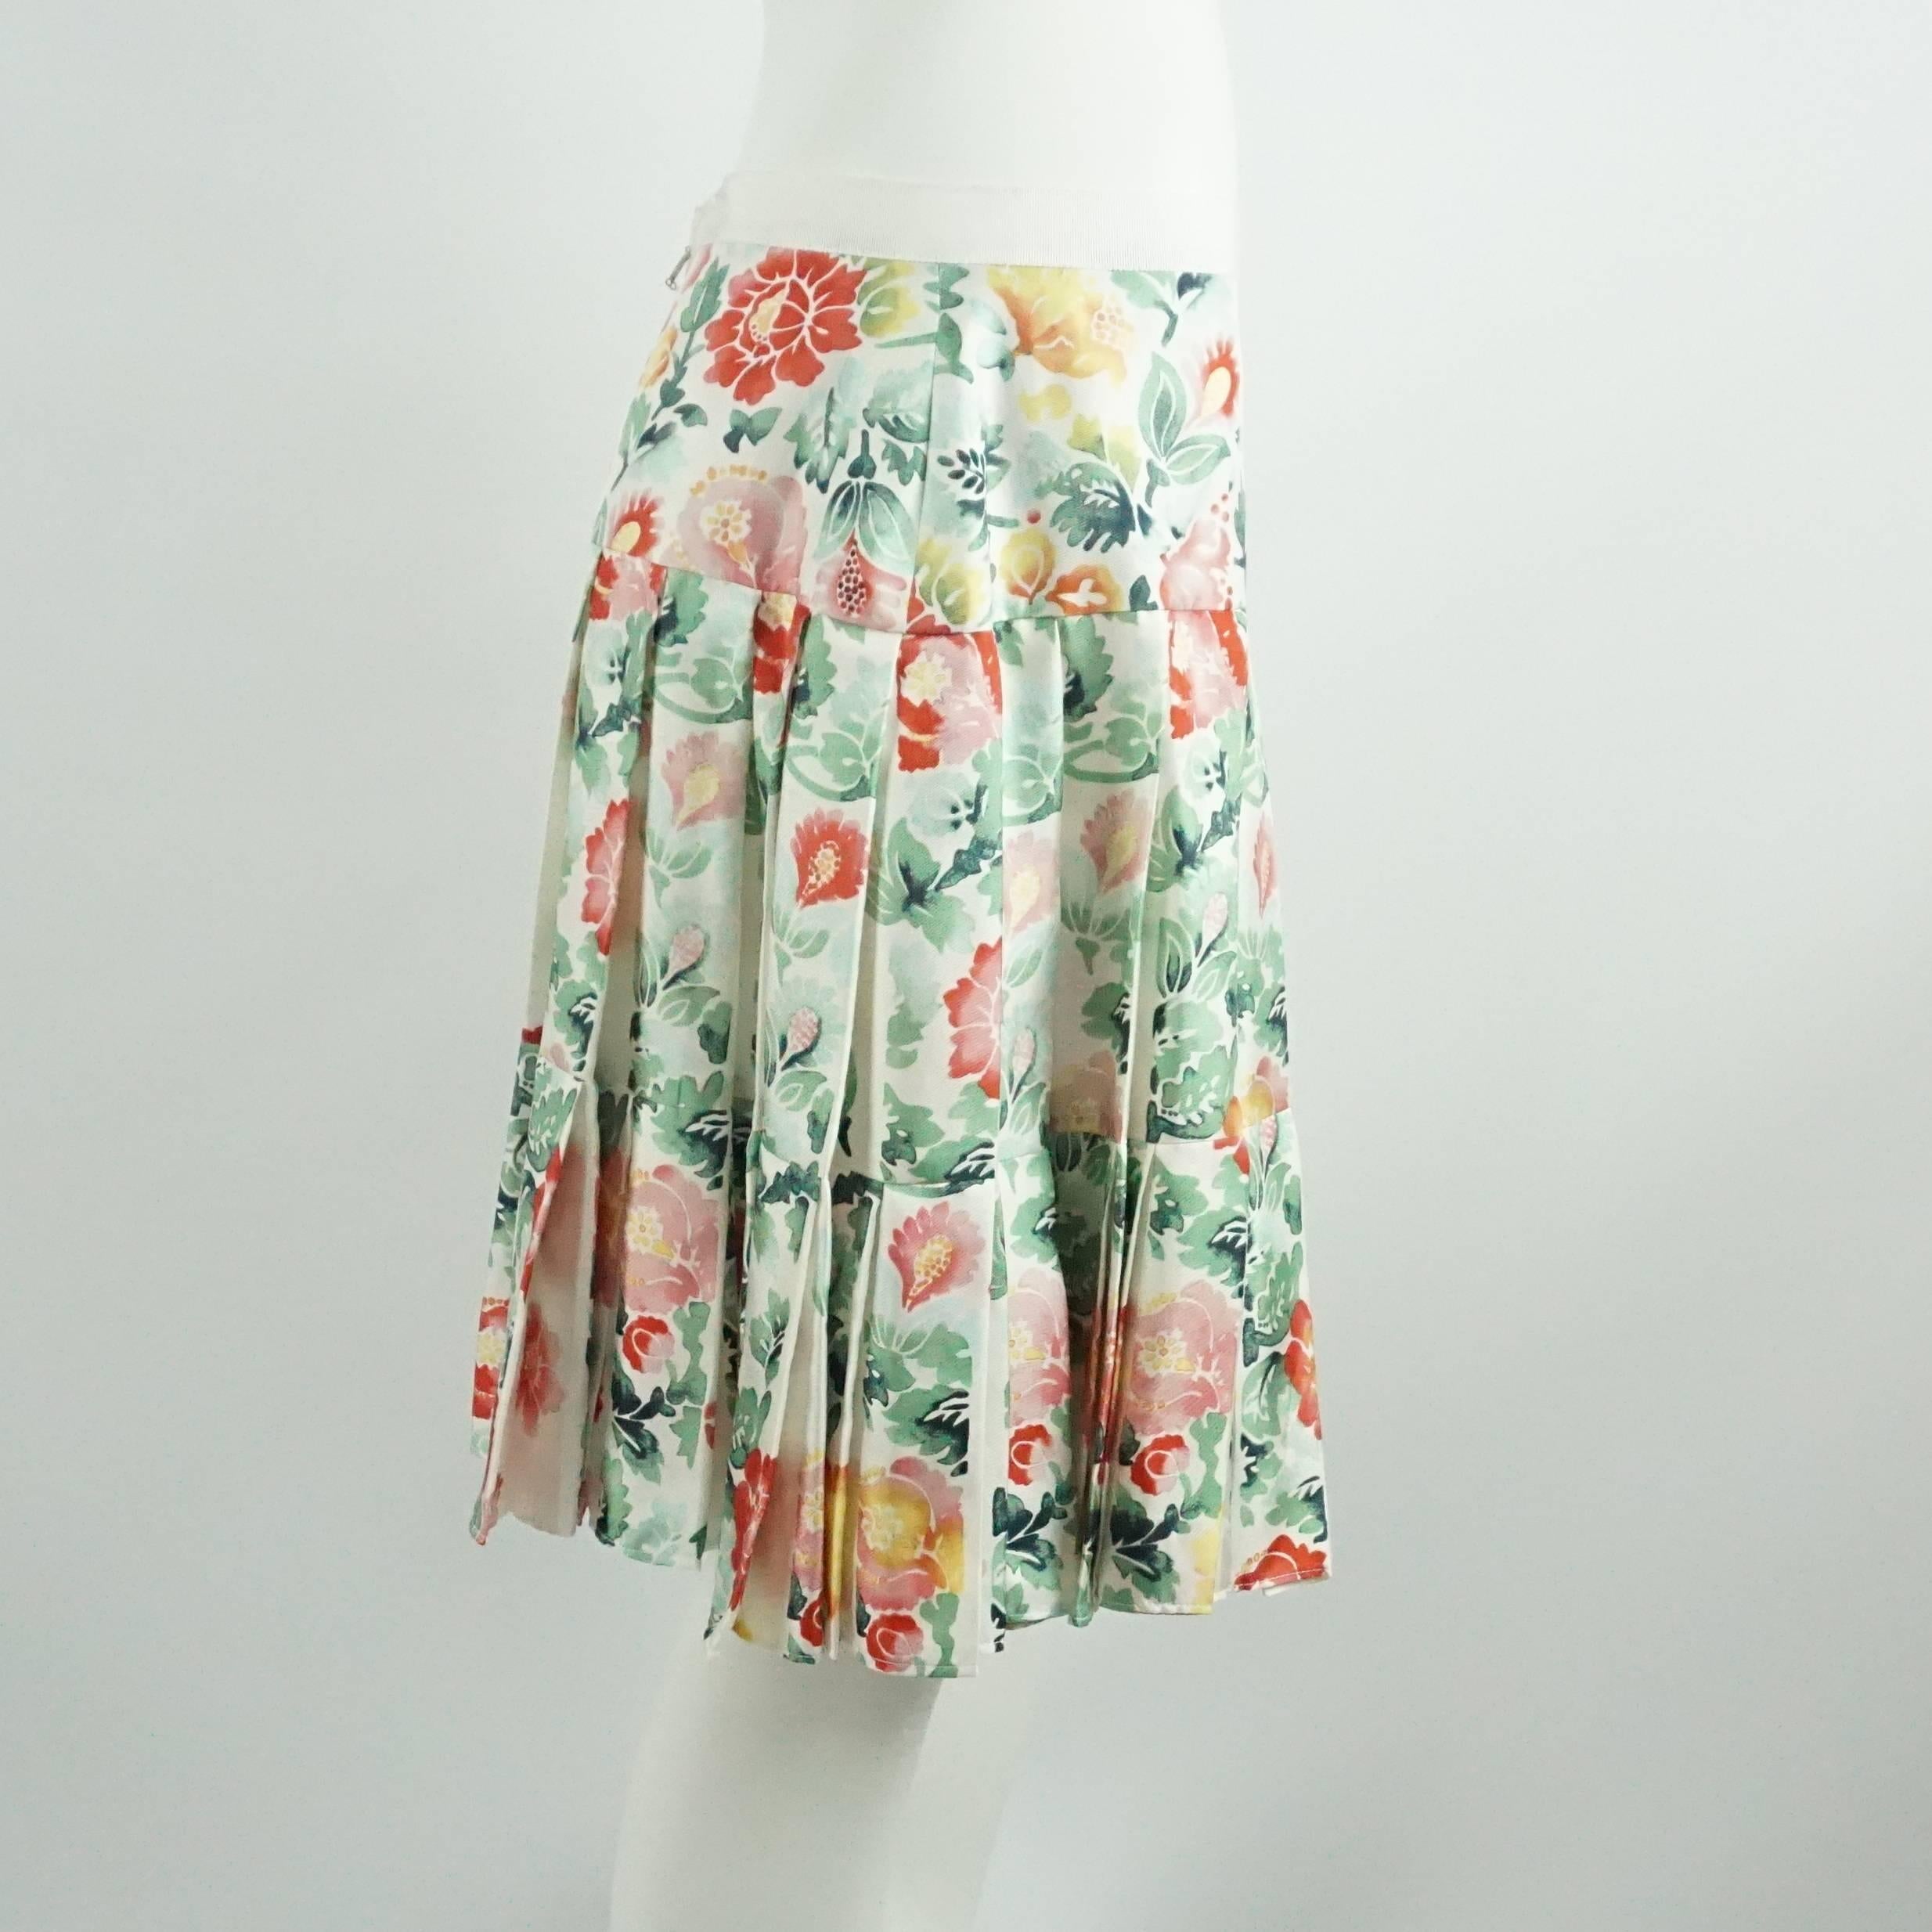 This Oscar de la Renta is white silk. This skirt has a multicolored floral design with colors such as green, red, and pink. This skirt also has pleats. It is in excellent condition.

Measurements
Waist: 32